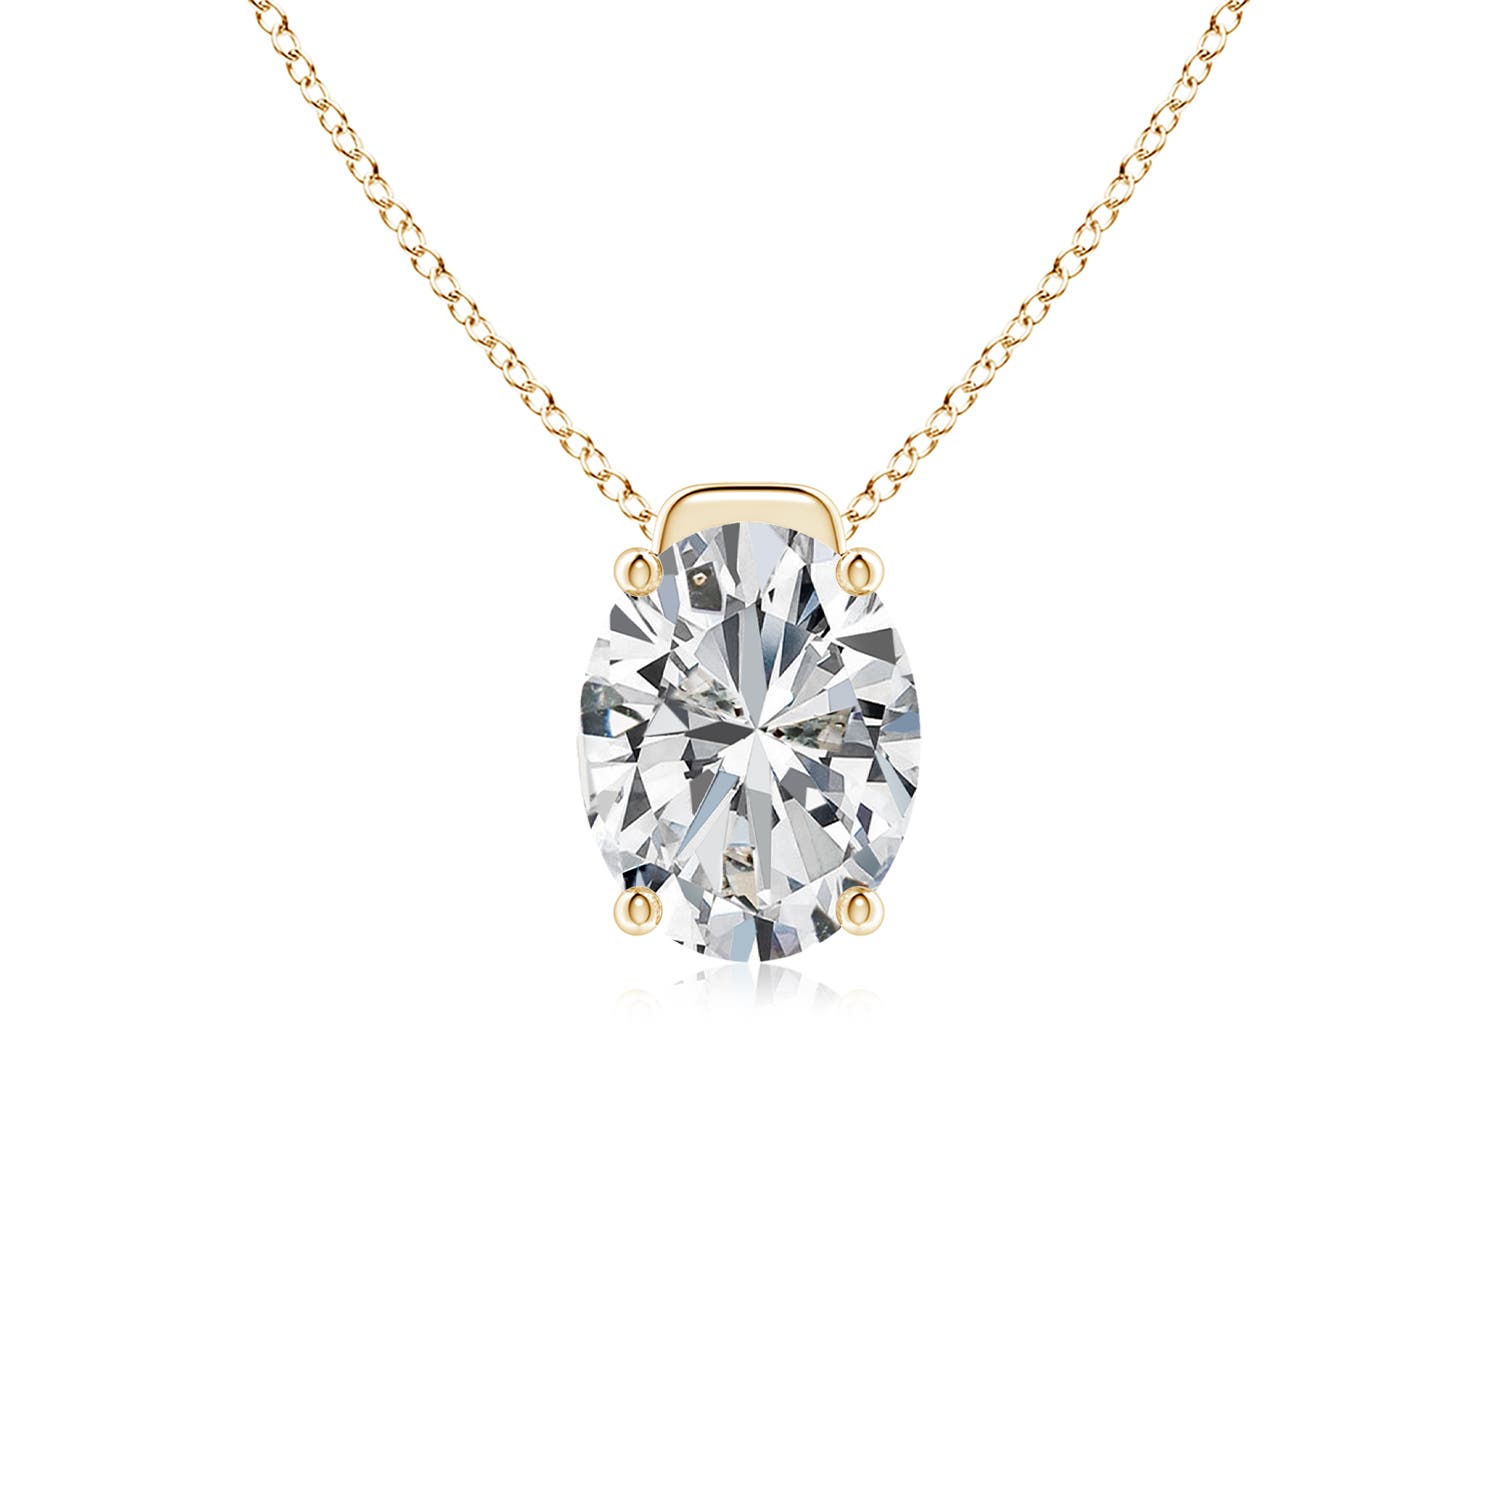 H, SI2 / 1.76 CT / 14 KT Yellow Gold